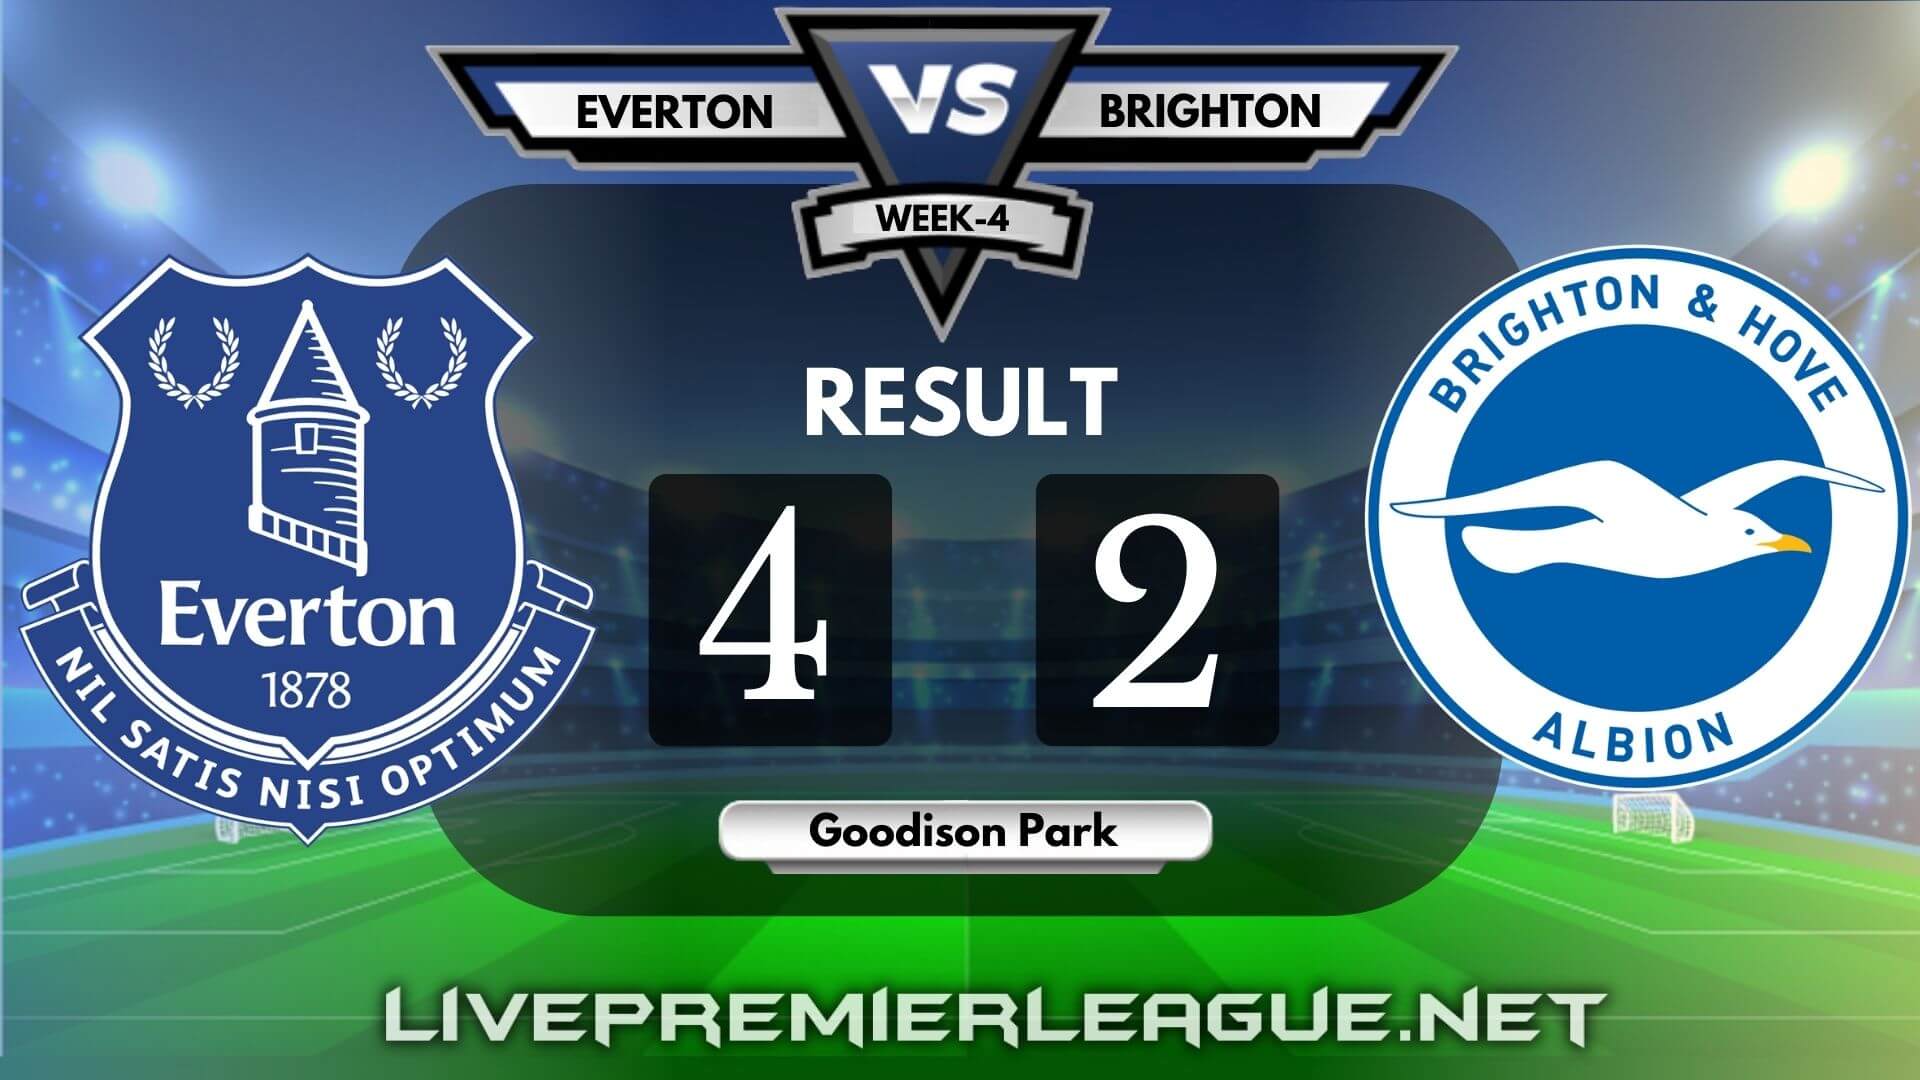 Everton Vs Brighton and Hove Albion | Week 4 Result 2020